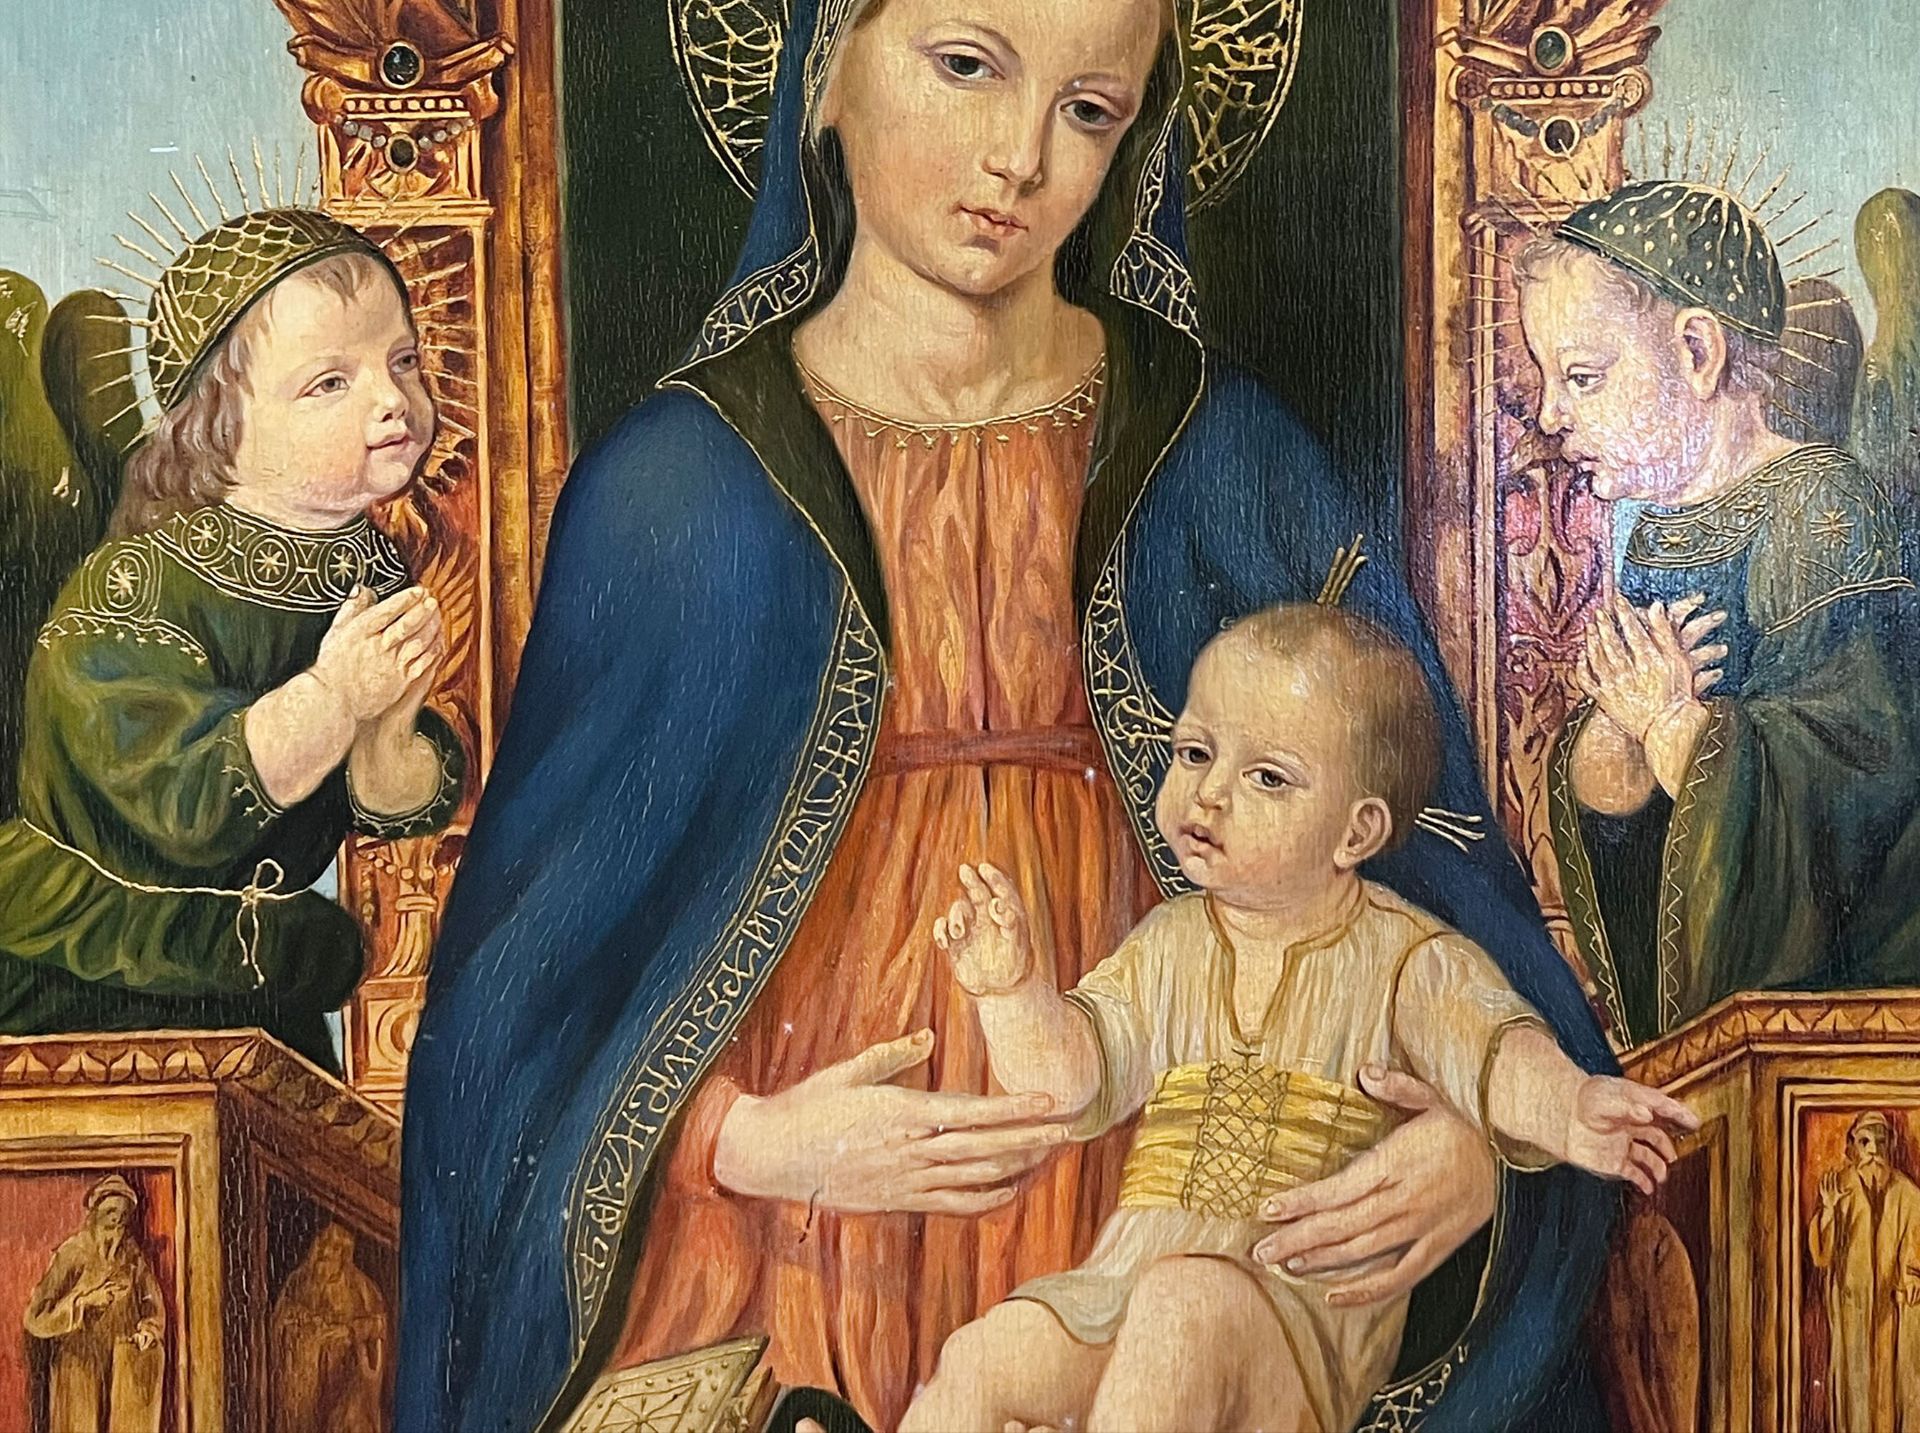 UNSIGNED (XX). Madonna with Child Jesus. Probably 19th century. Italy. - Image 4 of 12